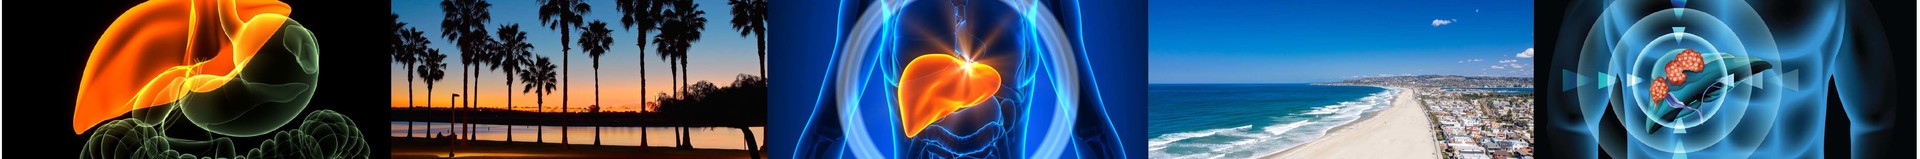 36th Annual New Treatments in Chronic Liver Disease CME Conference